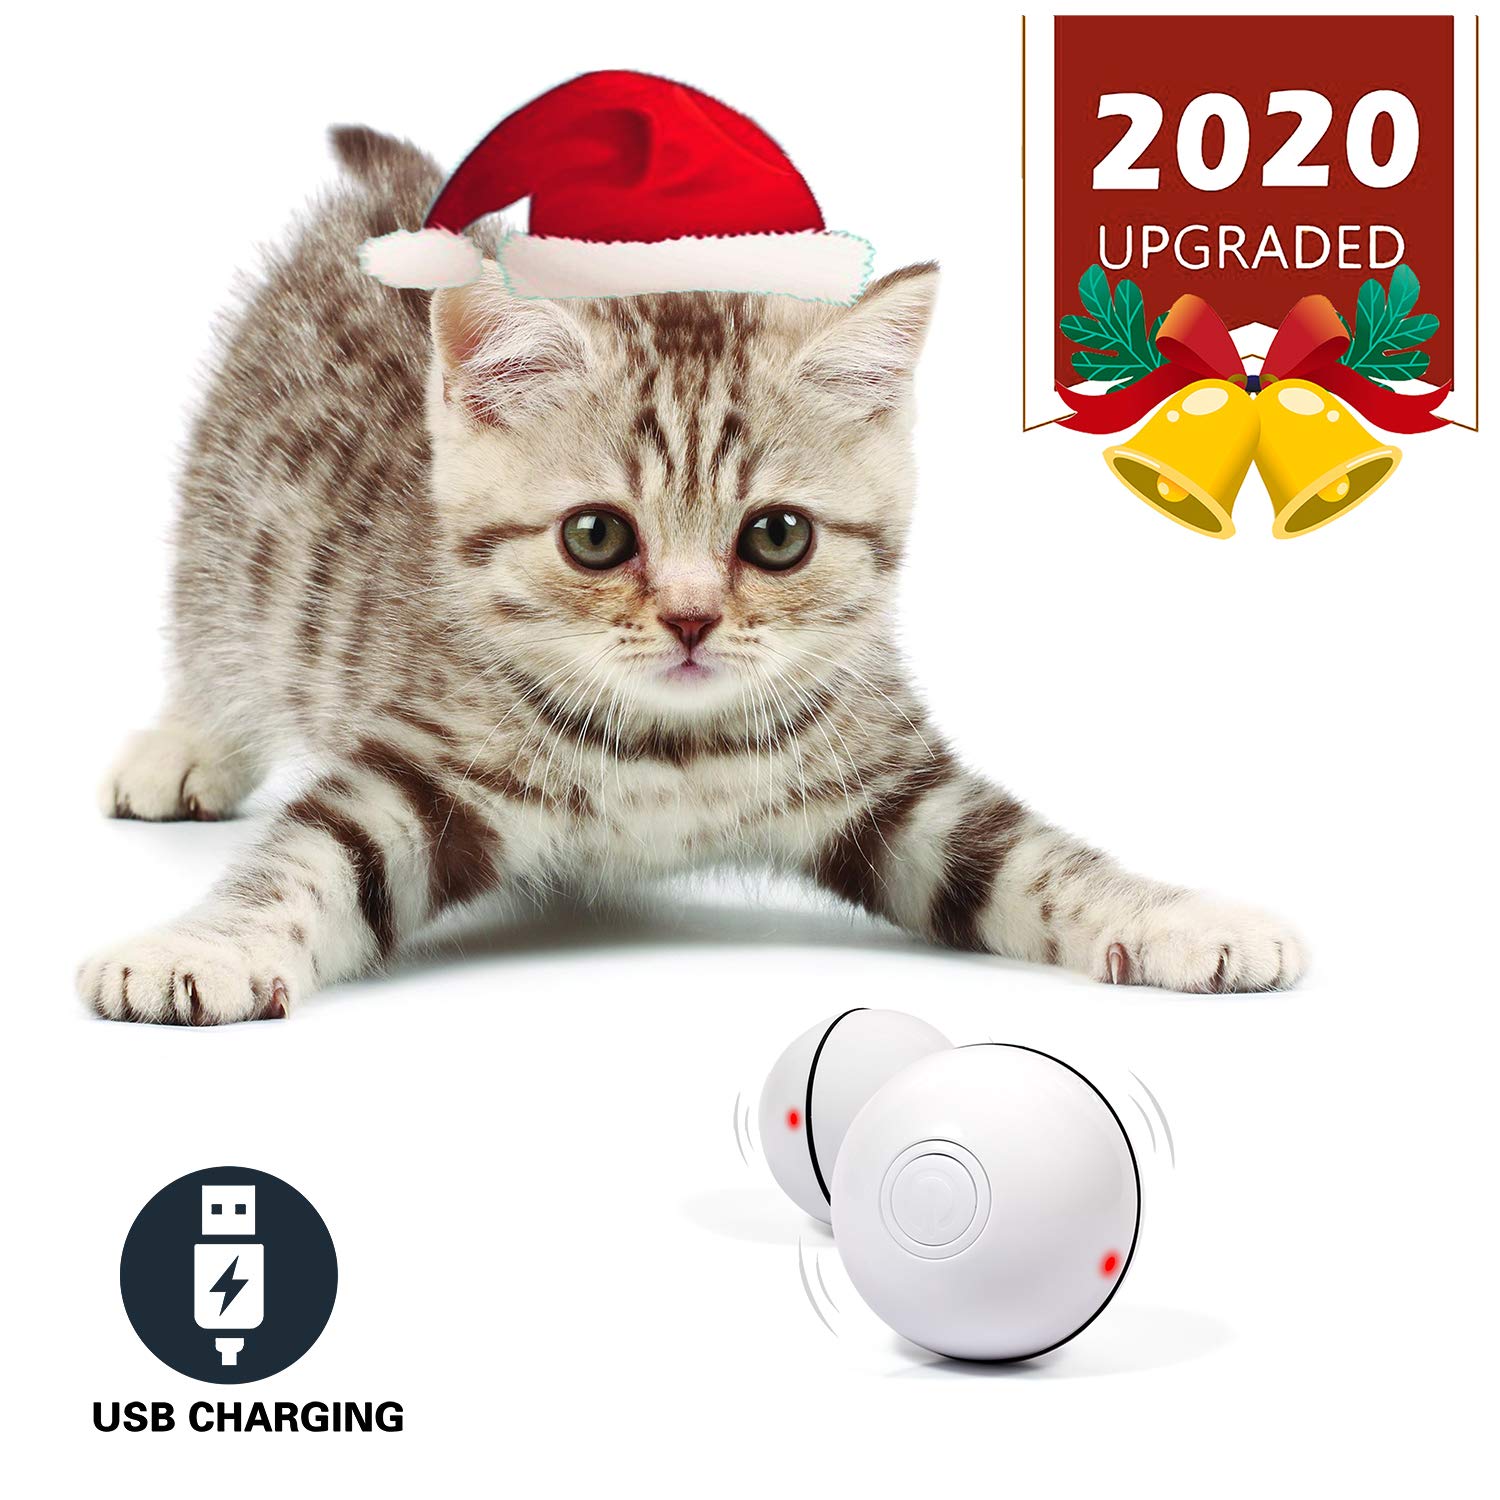 White YOFUN Smart Interactive Cat Toy - Newest Version 360 Degree Self Rotating Ball, USB Rechargeable Pet Toy, Build-in Spinning Led Light, Stimulate Hunting Instinct for Your Kitty Utoper